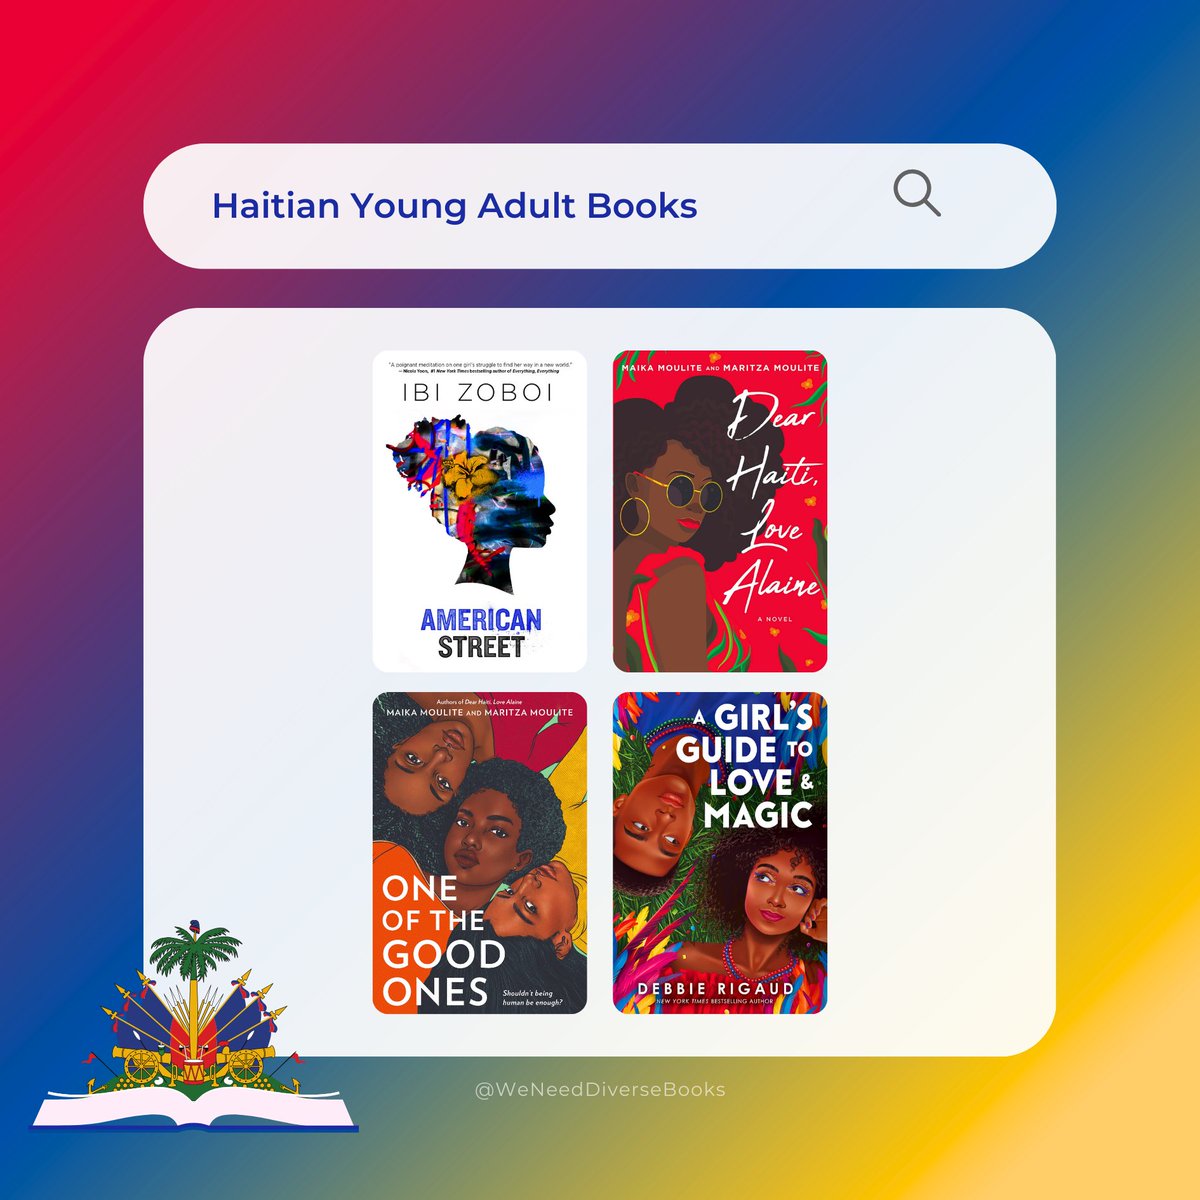 @TraceyBaptiste @AmberRenArt @TamiWritesStuff @_jacqueline_ill @daniellejoseph1 YOUNG ADULT

💙 American Street by Ibi Zoboi
❤️ Dear Haiti, Love Alaine by @maikamoulite & @MaritzaMoulite
💙 One of the Good Ones by Maika & Maritza Moulite
❤️ A Girl’s Guide to Love & Magic by @debbierigaud